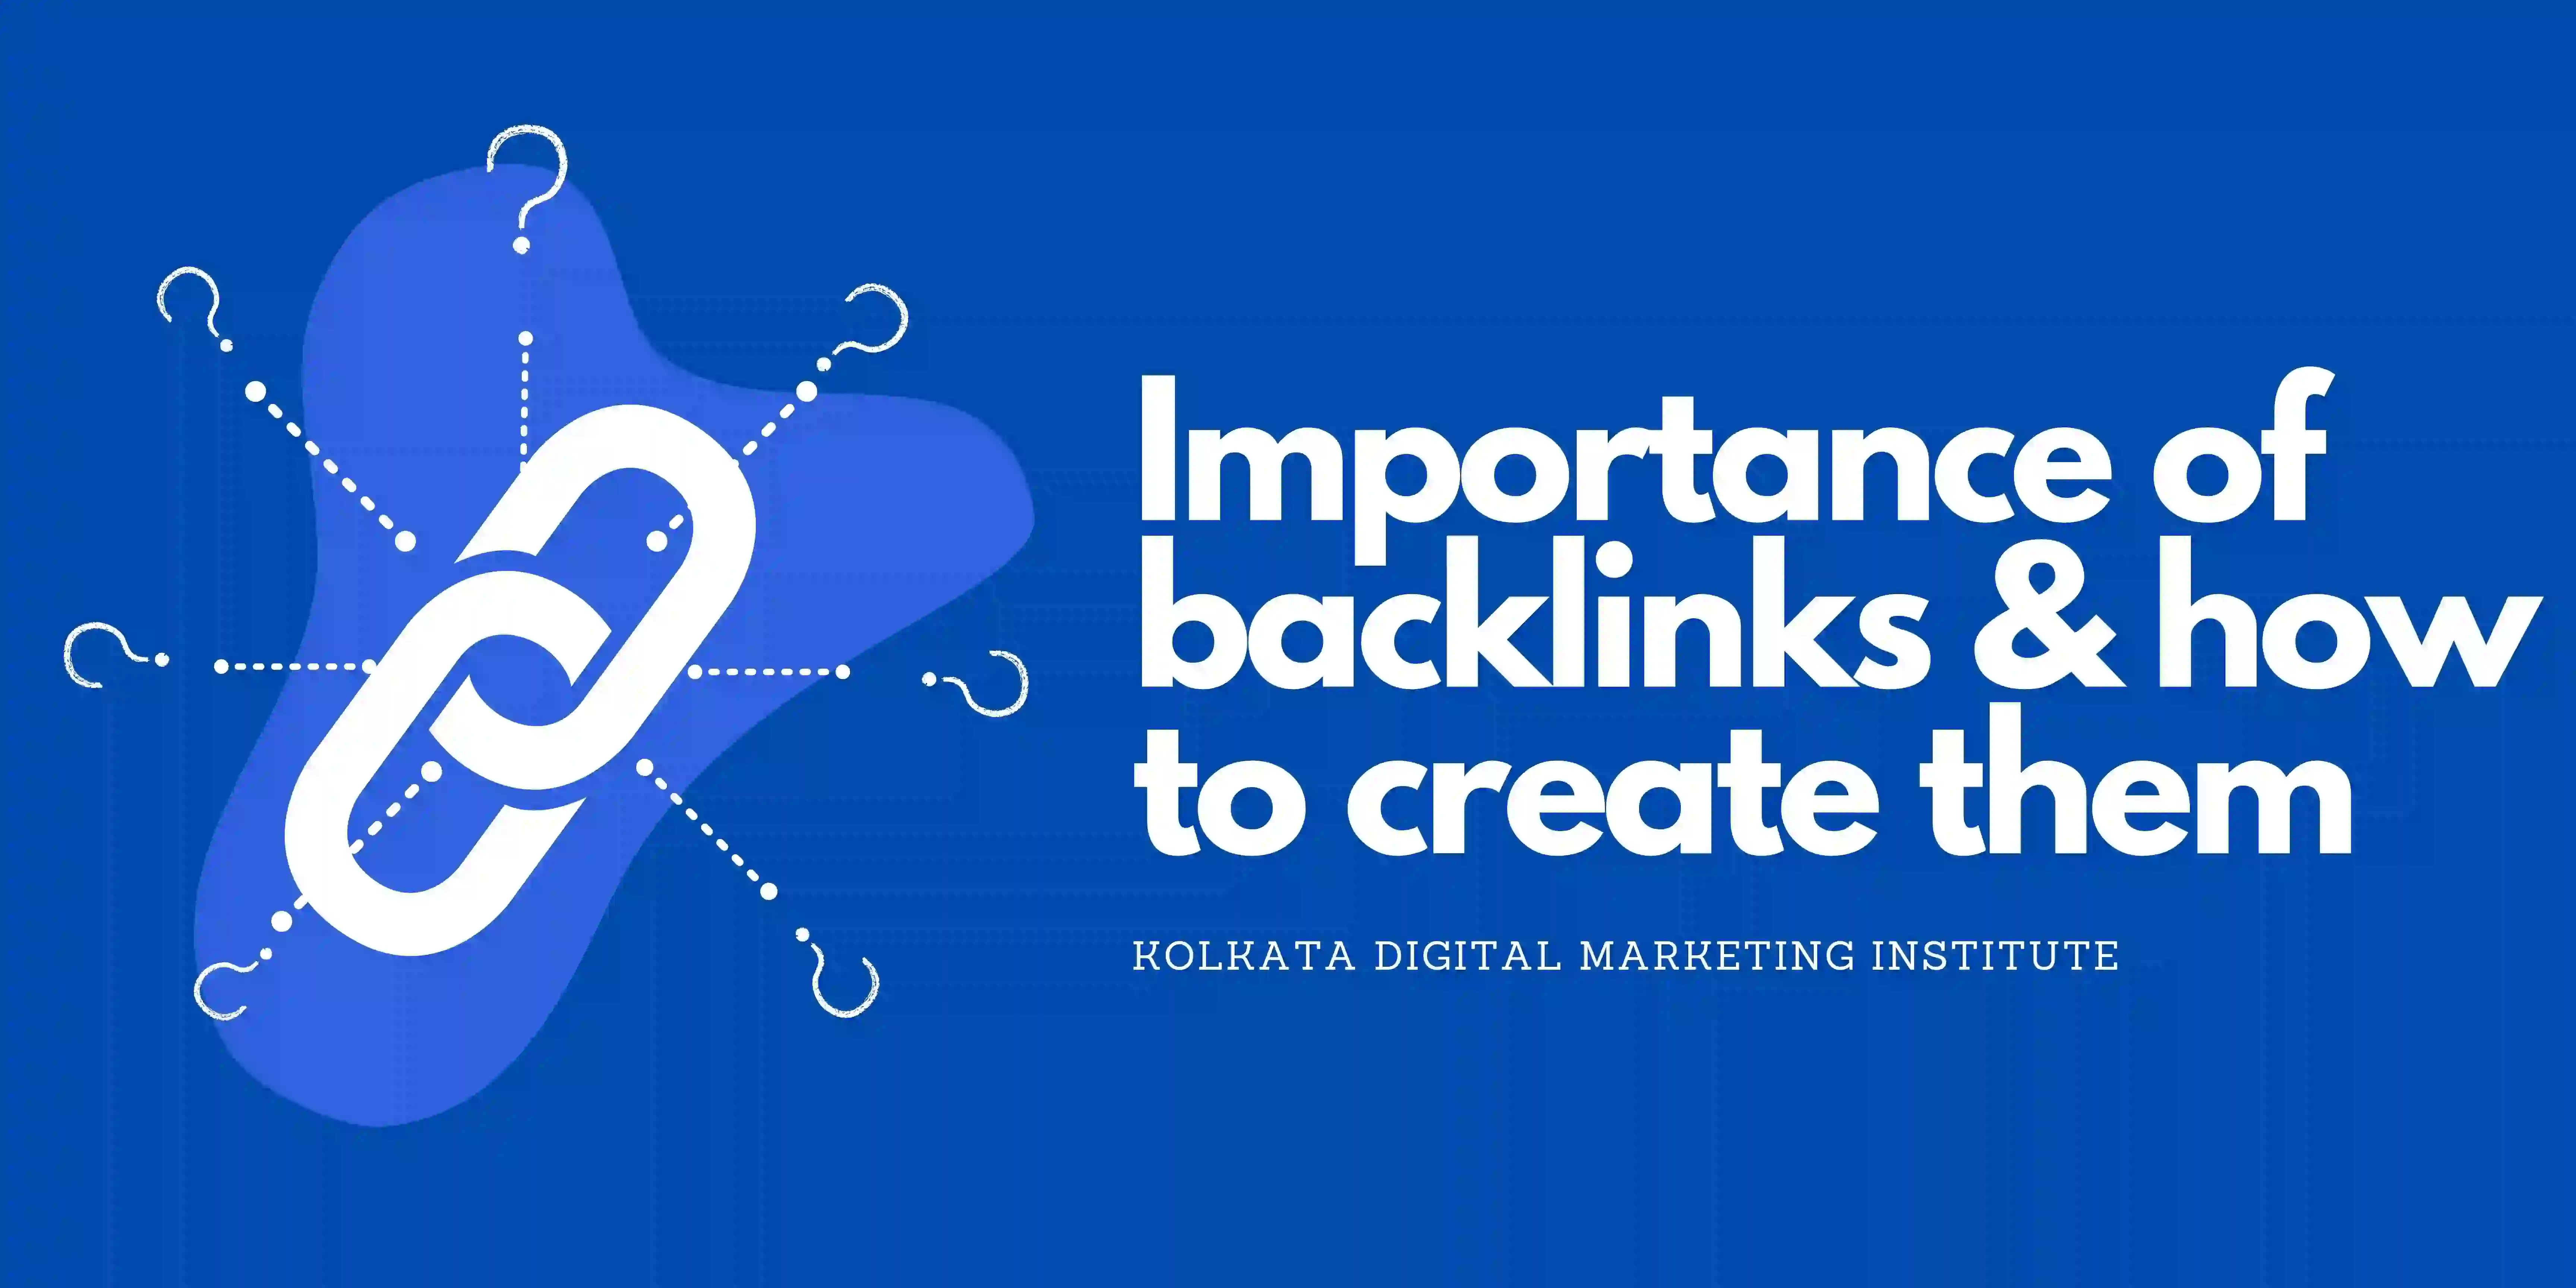 You are currently viewing IMPORTANCE OF BACKLINKS AND HOW TO CREATE HIGH QUALITY BACKLINKS IN 2022